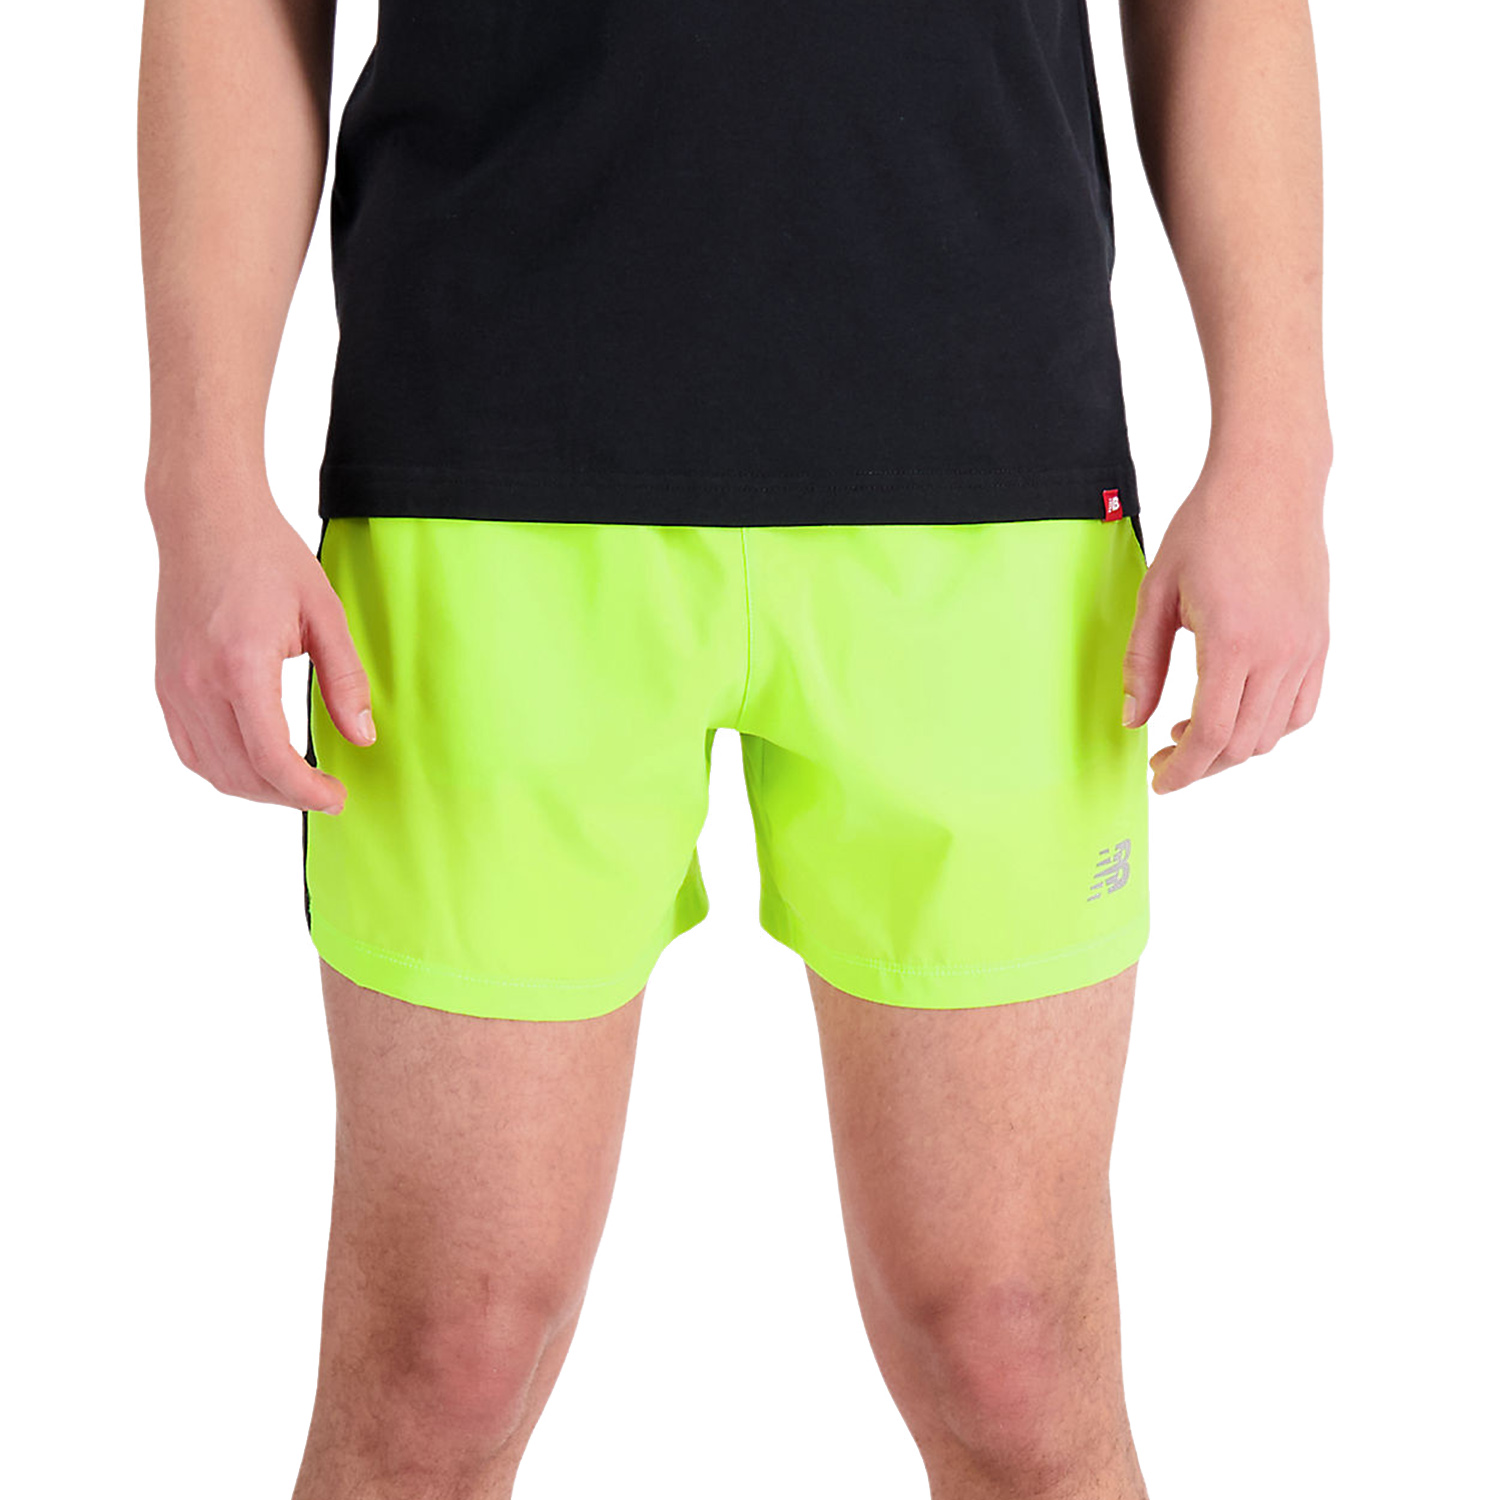 Accelerate Run Shorts  Fitness models, Running, Acceleration